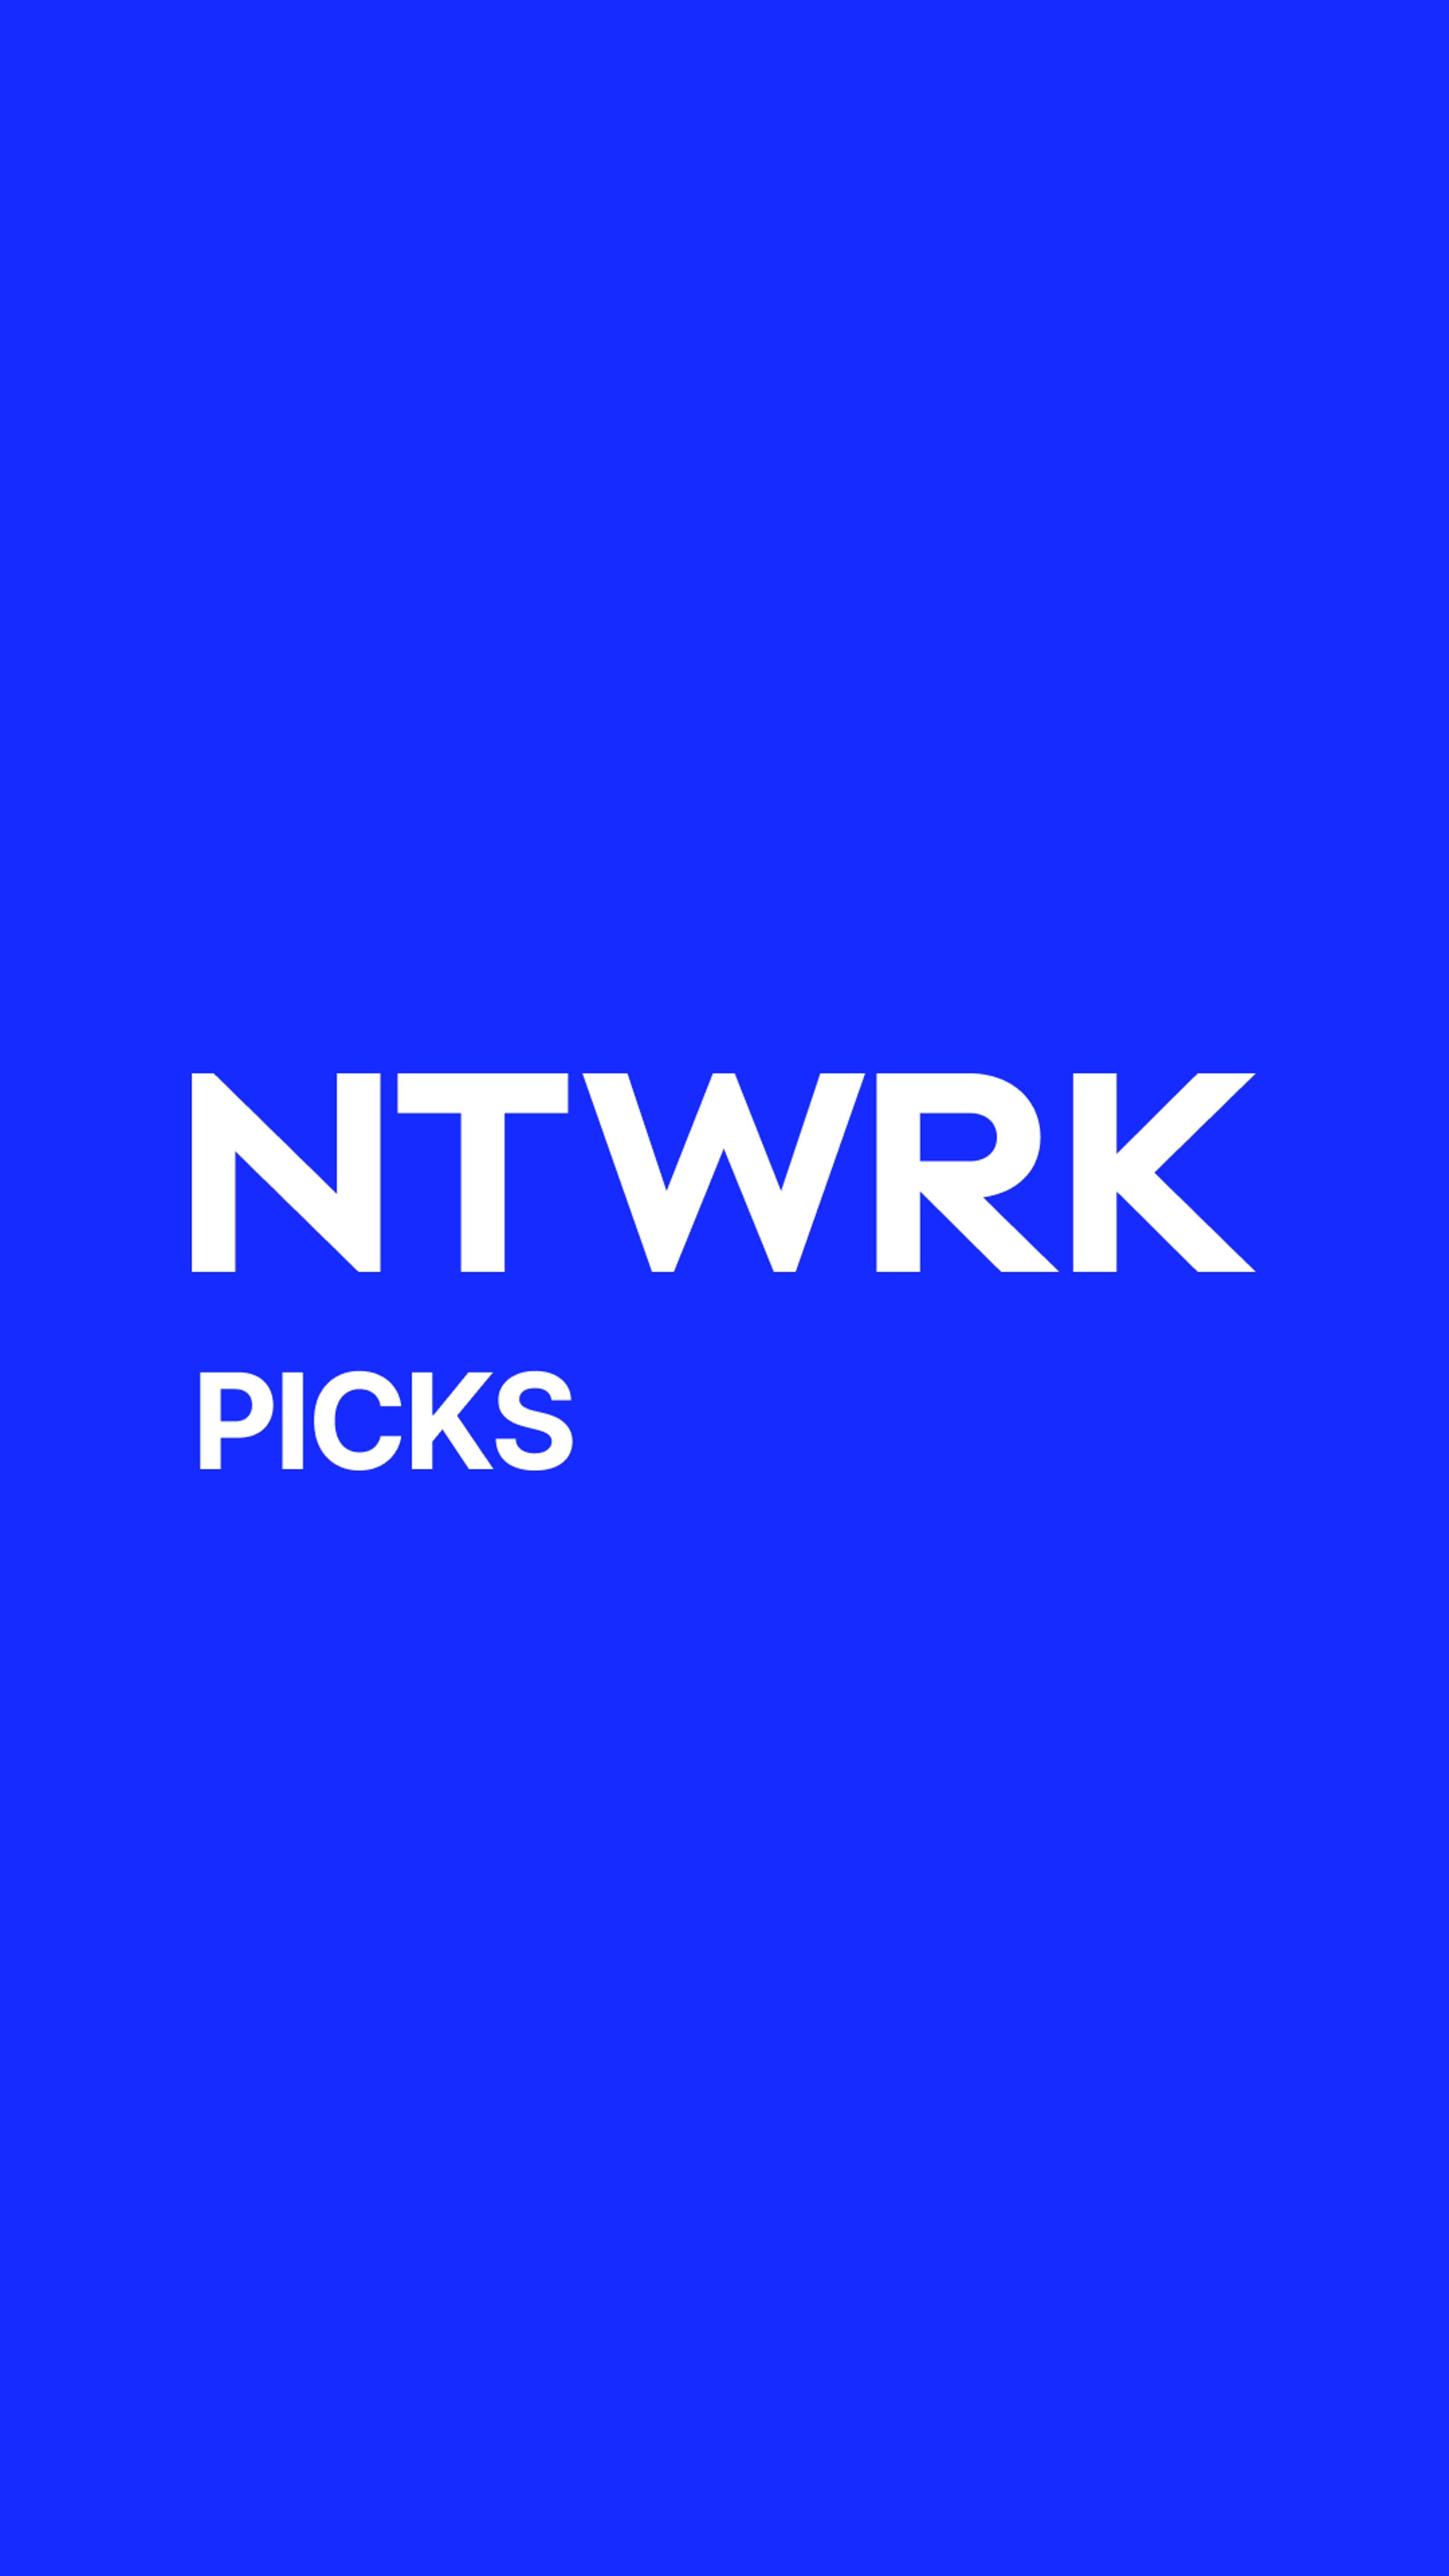 Preview image for the show titled "NTWRK Picks: Hellstar" at Today @ 10:00 PM